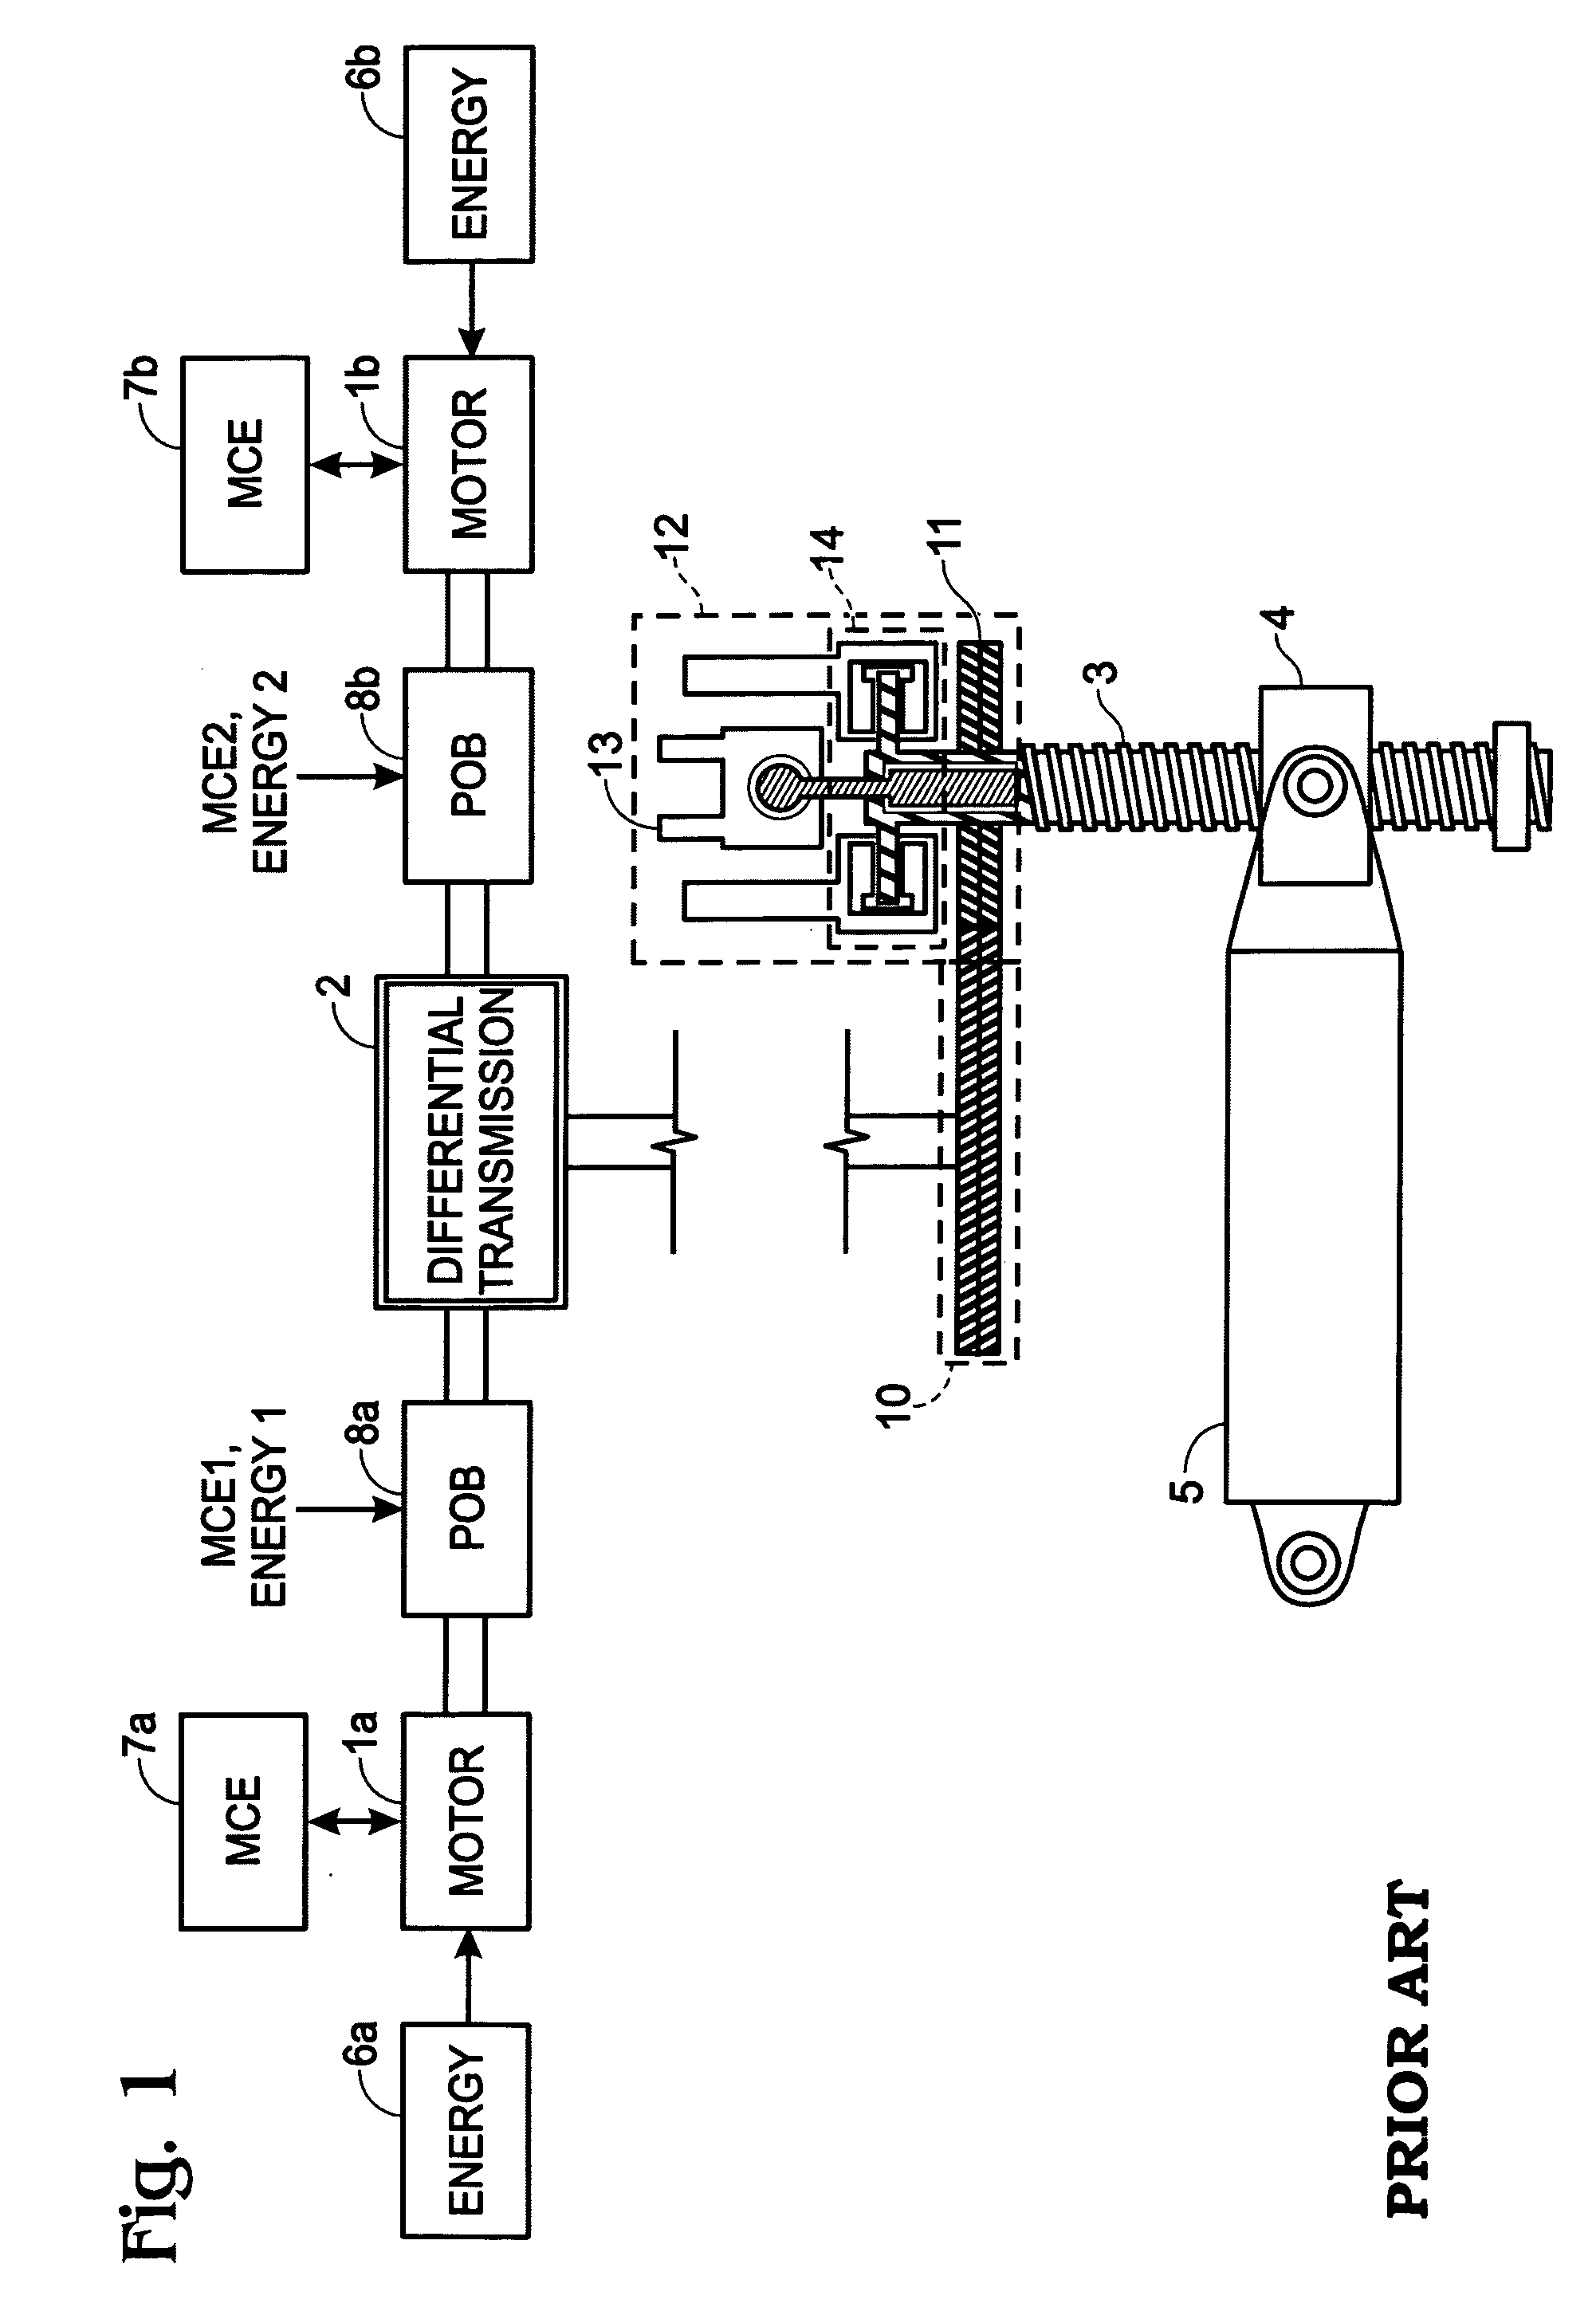 Apparatus for the adjustment of horizontal stabilizers for aircraft